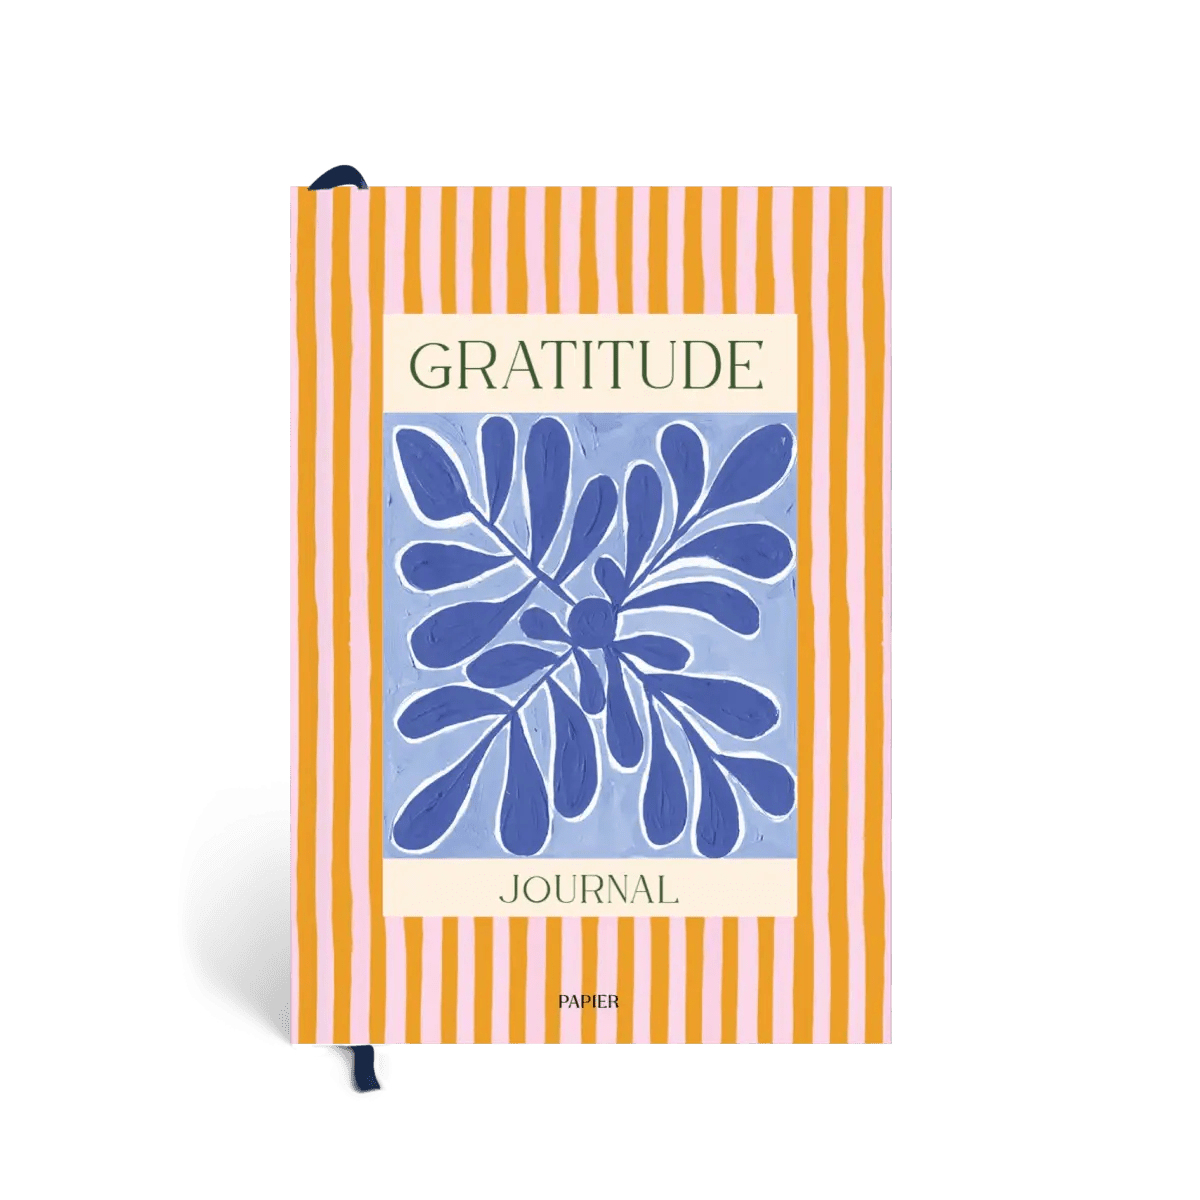 Stay Grounded Gratitude Journal Notebooks + Journals